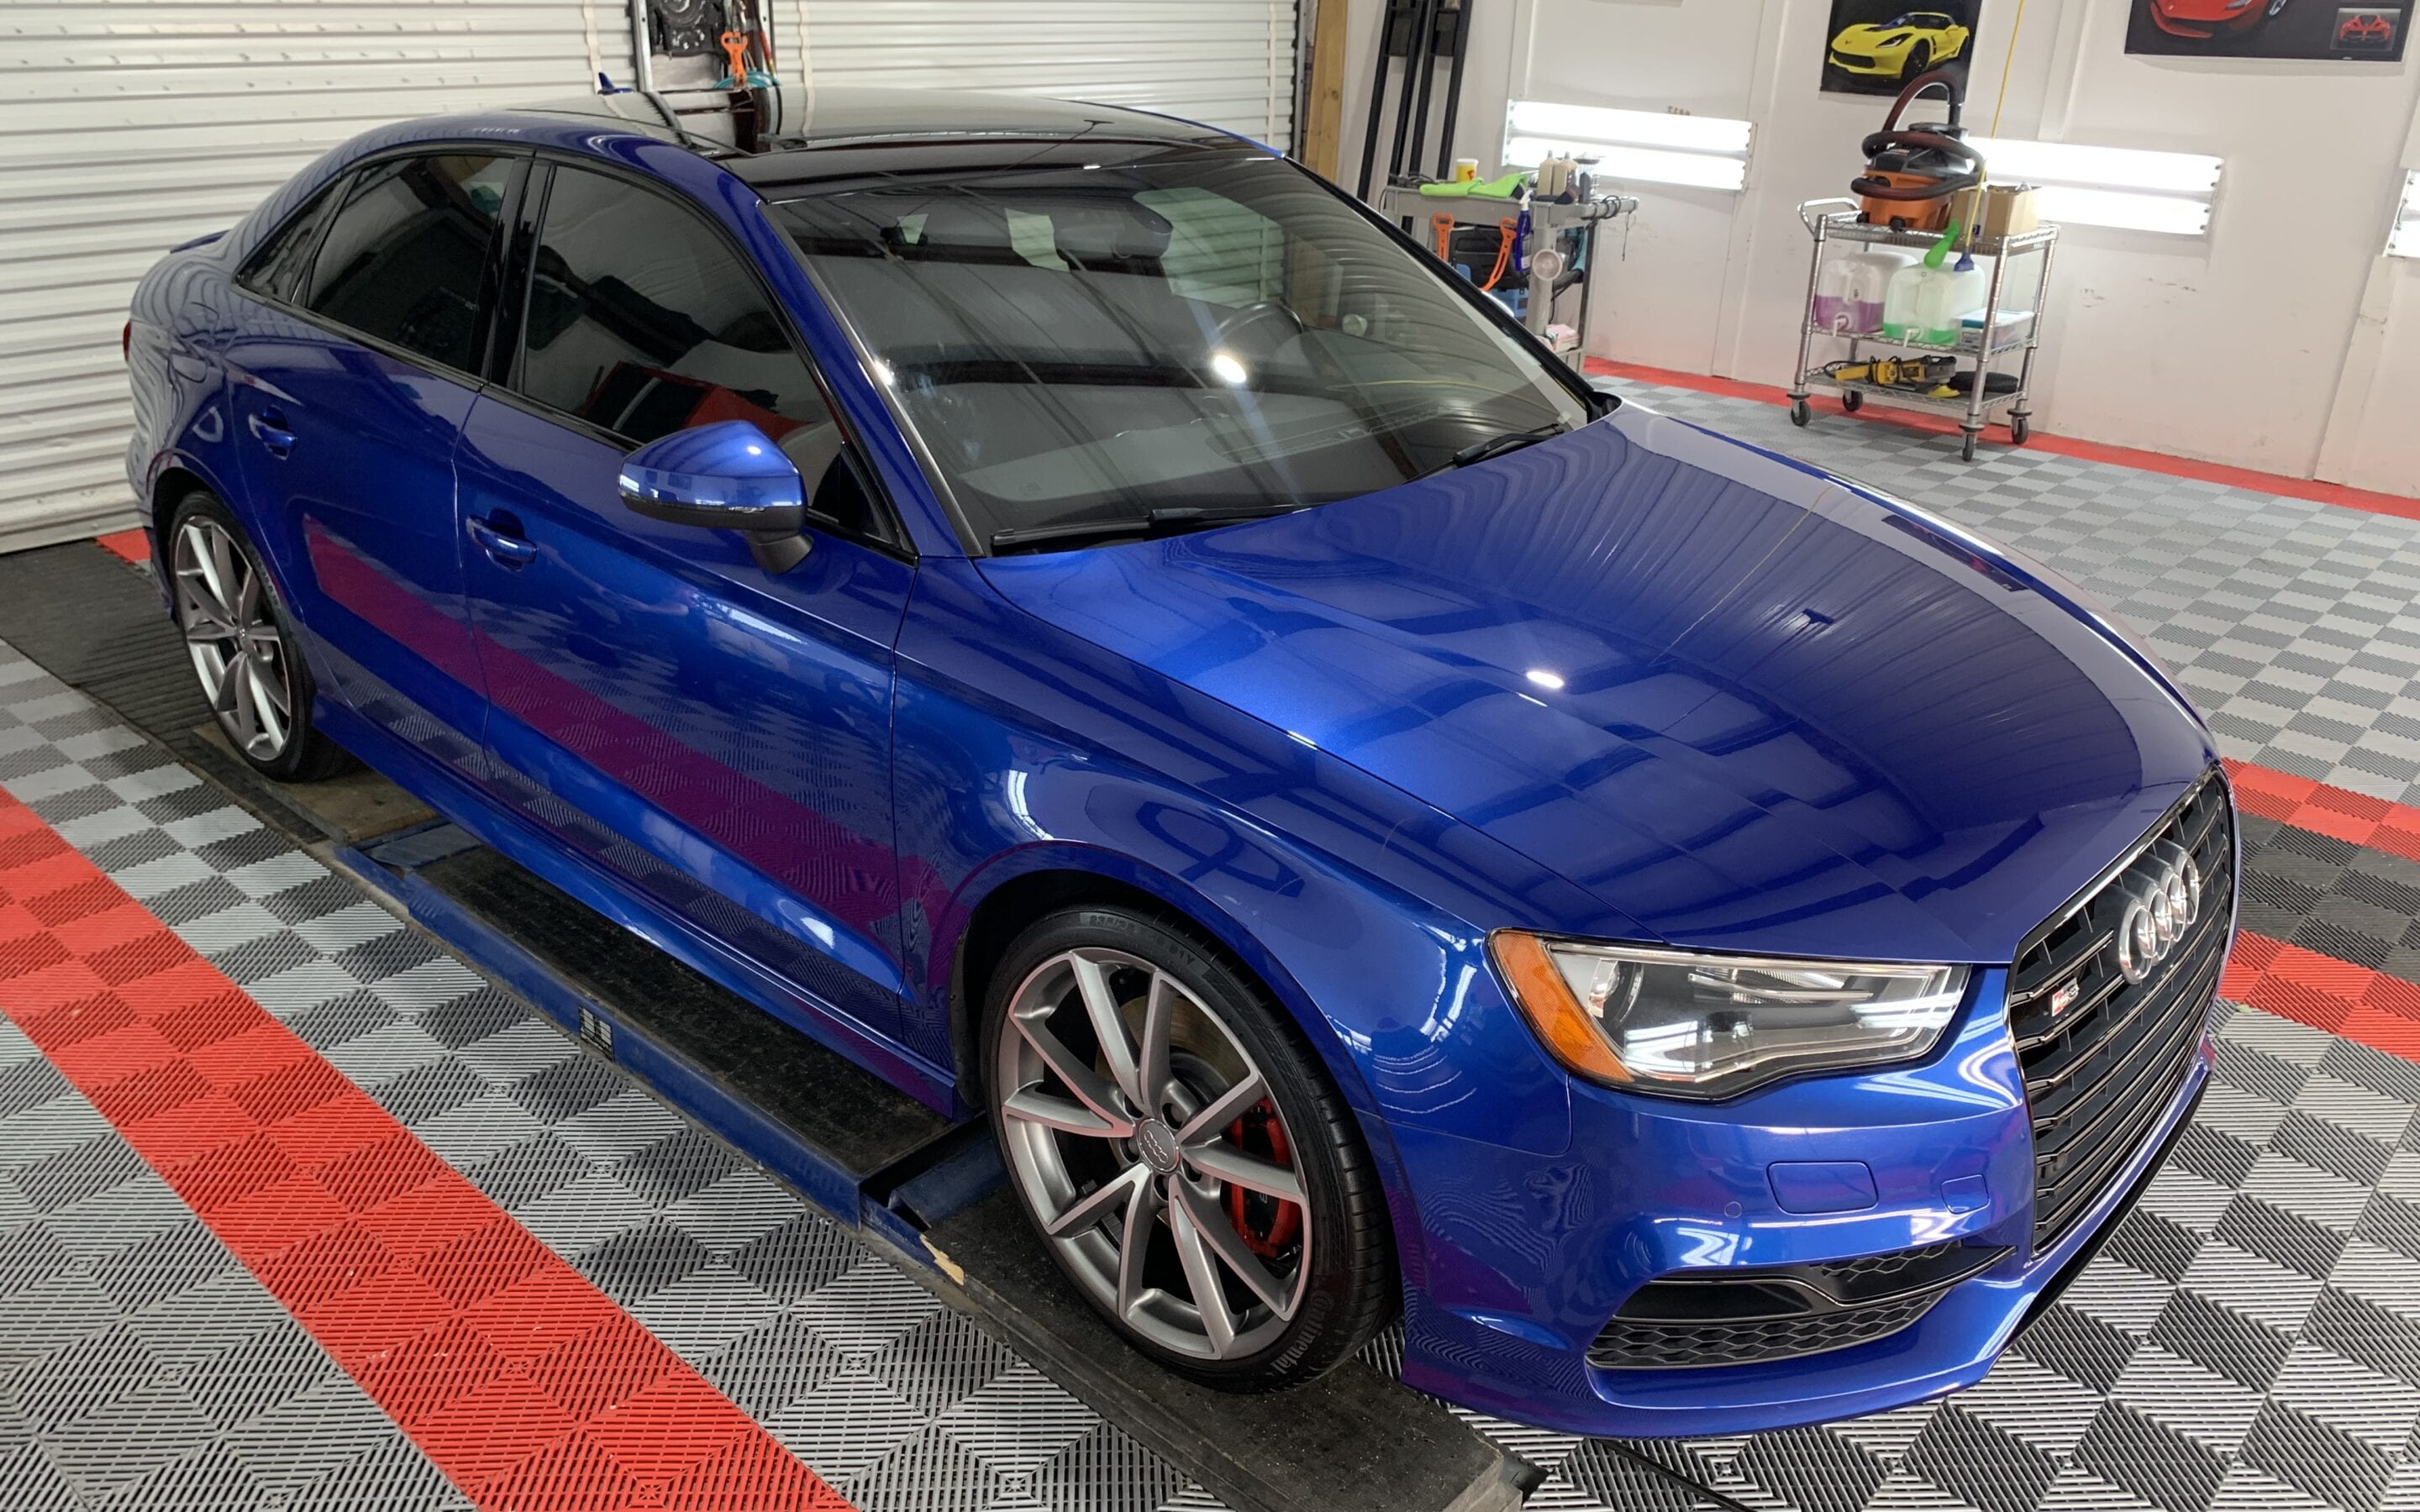 Photo of Ceramic Coating of a 2019 Audi A3 or S3 or RS3